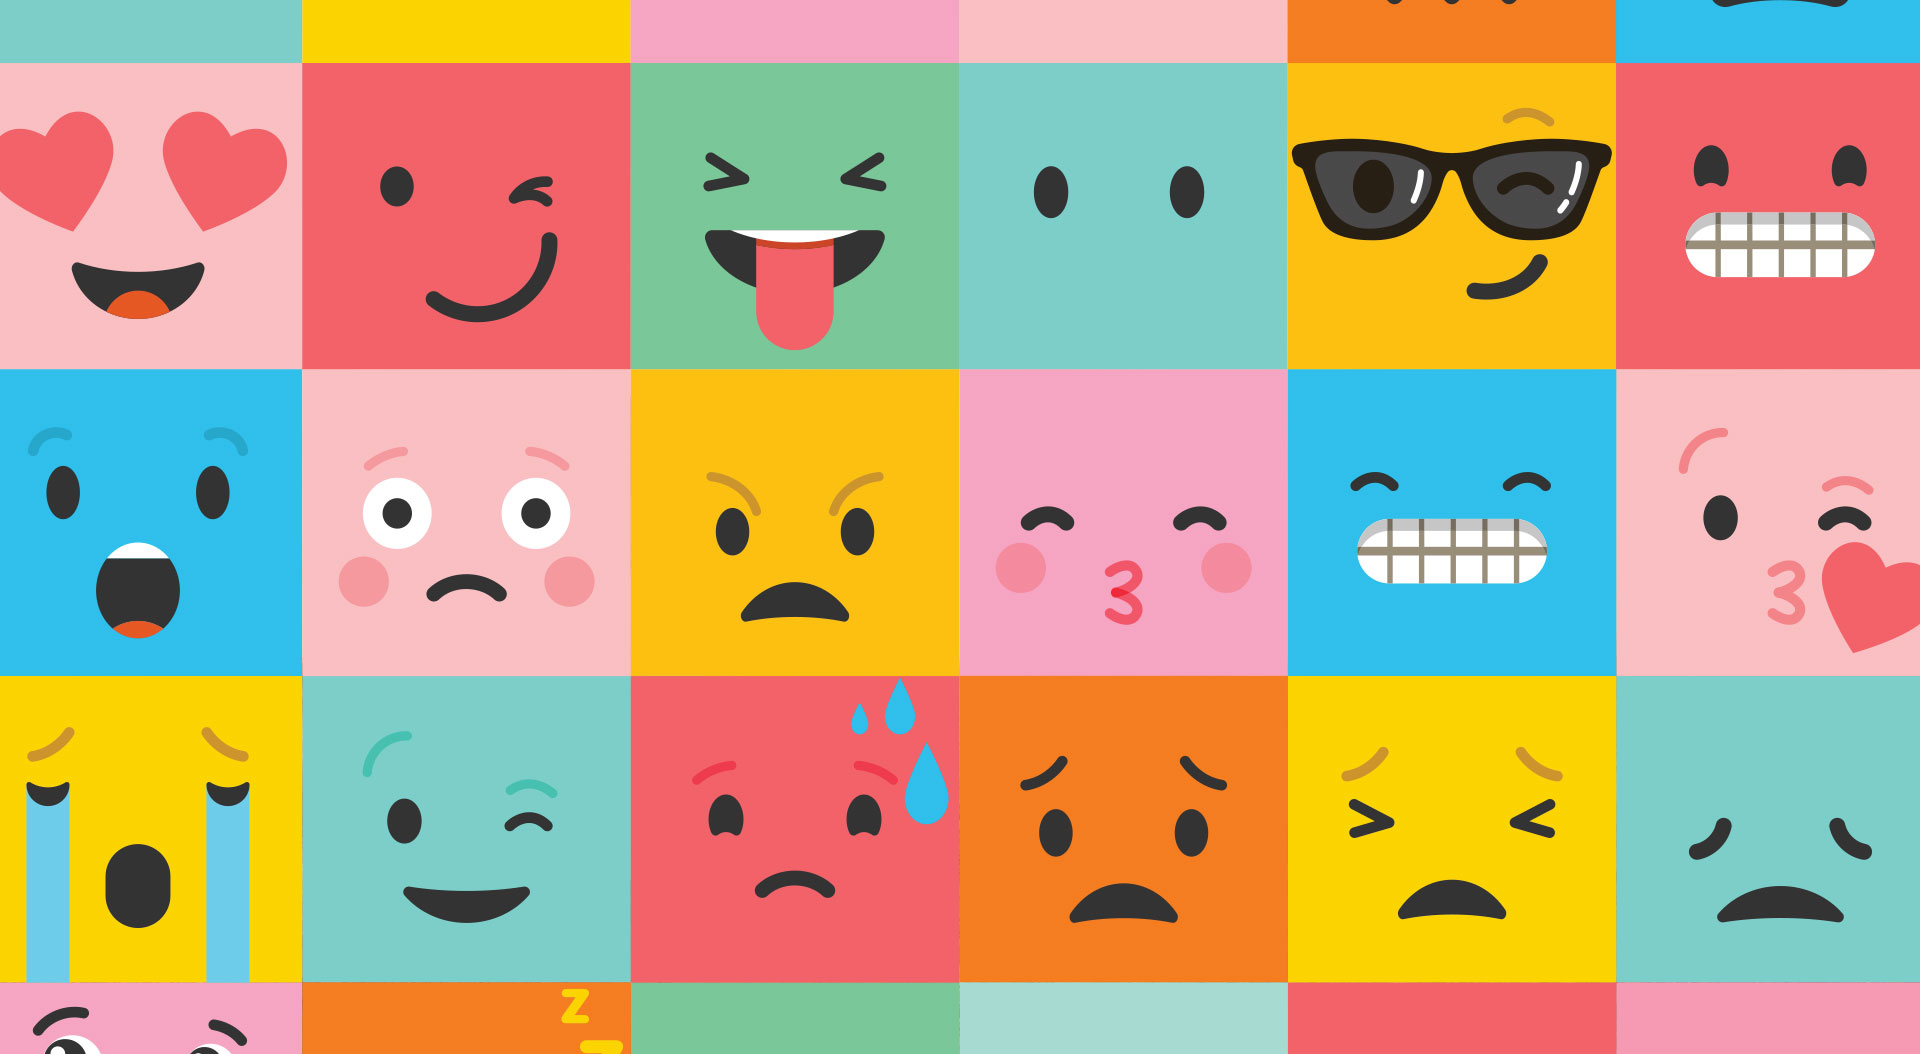 What, really, are emotions?